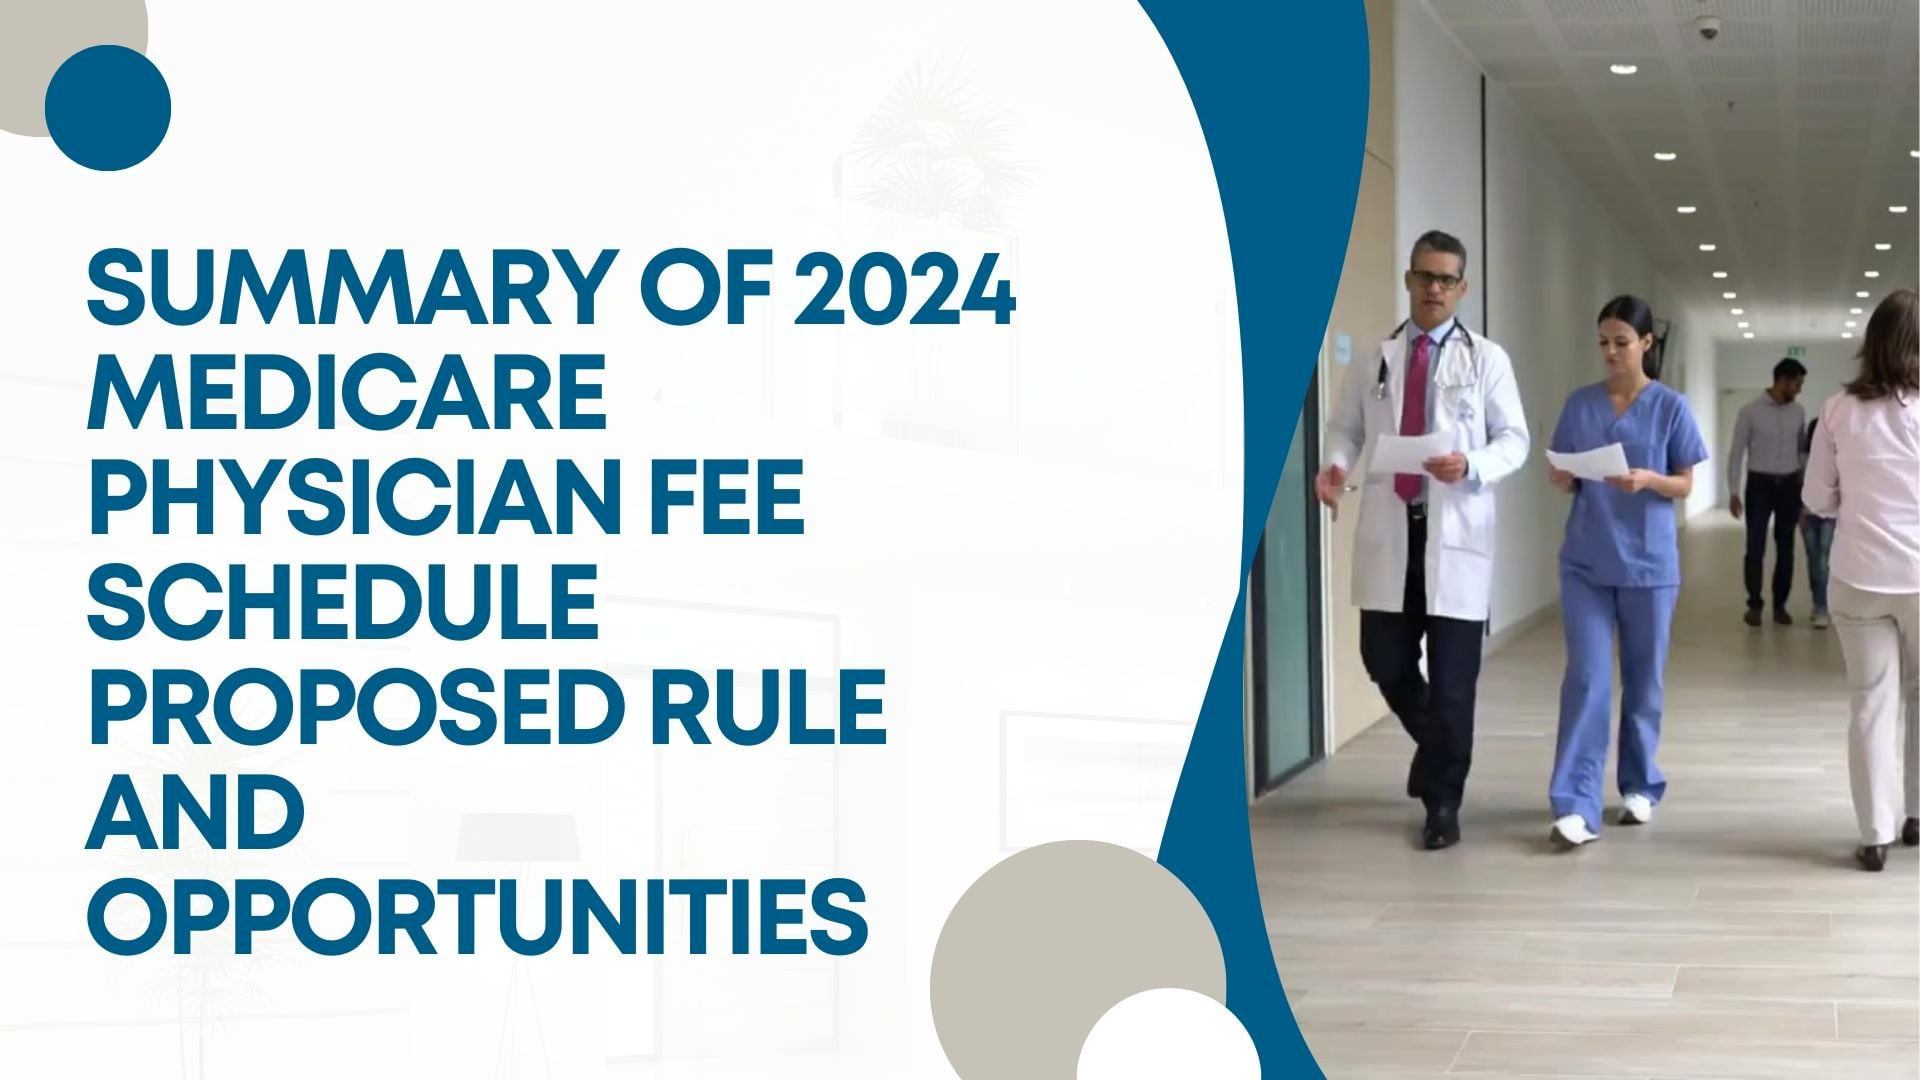 Summary of 2024 Medicare Physician Fee Schedule Proposed Rule and